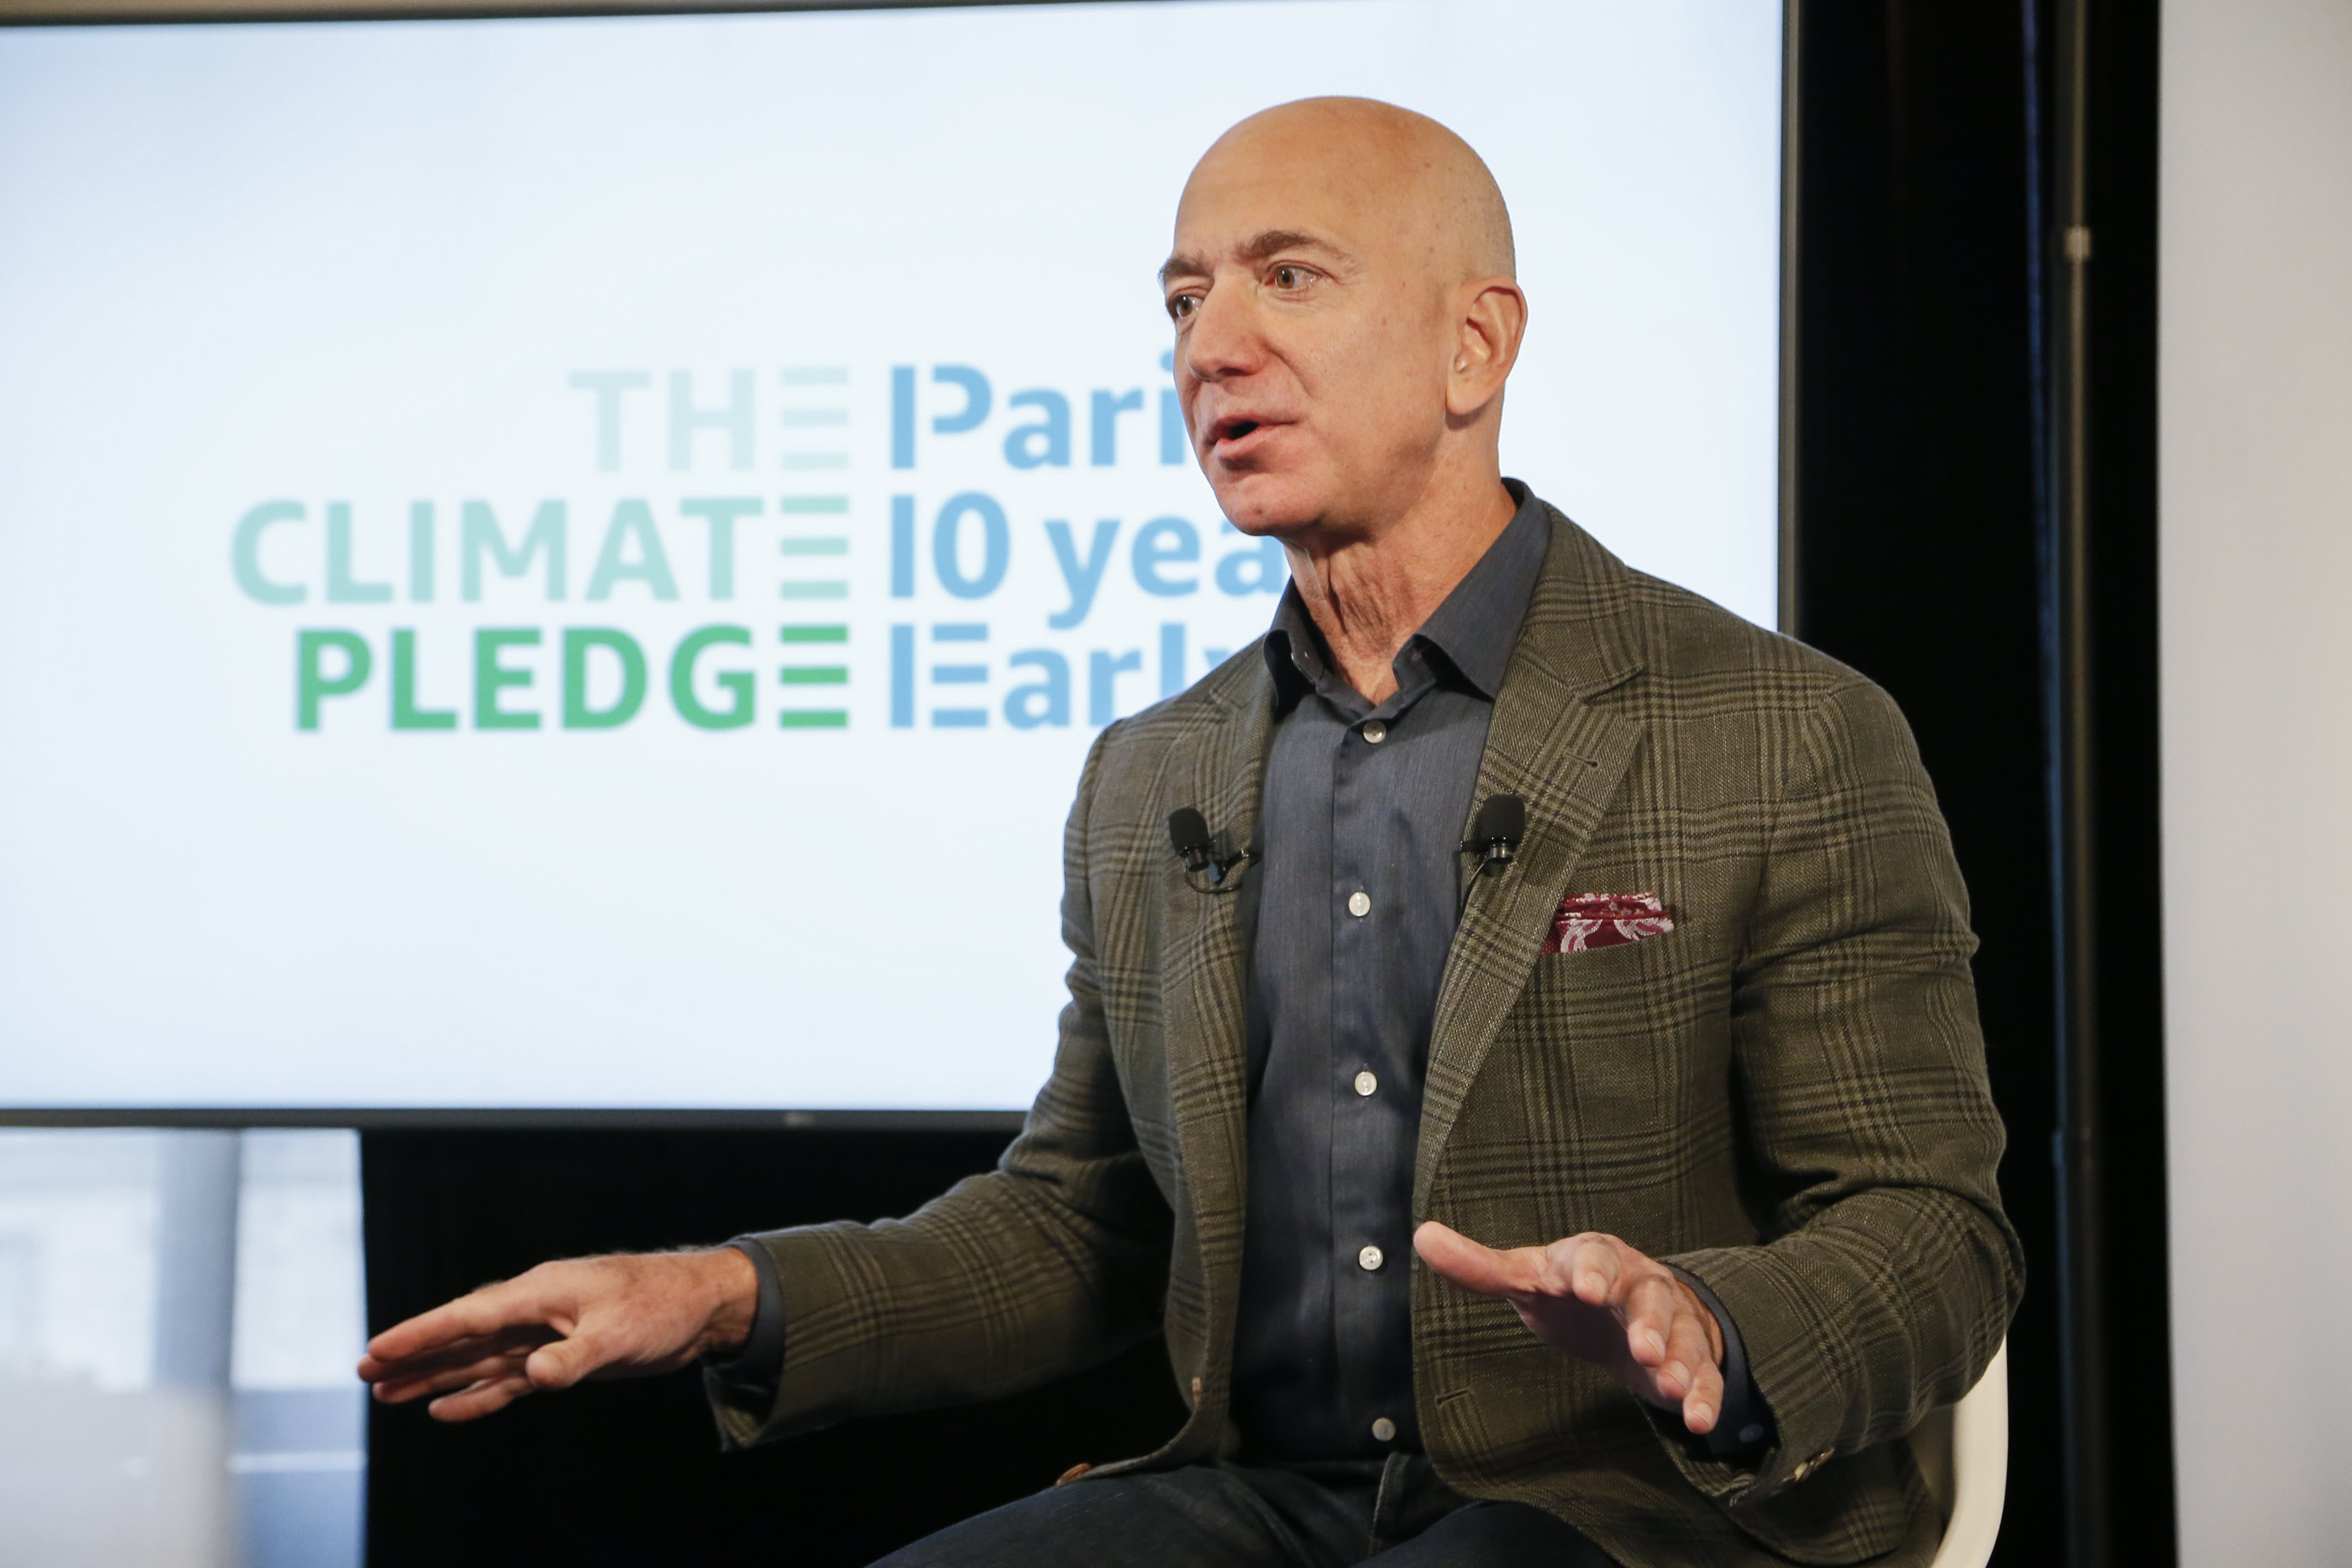 IBM is one of 20 companies that are joining Amazon on Jeff Bezos’ Climate Pledge